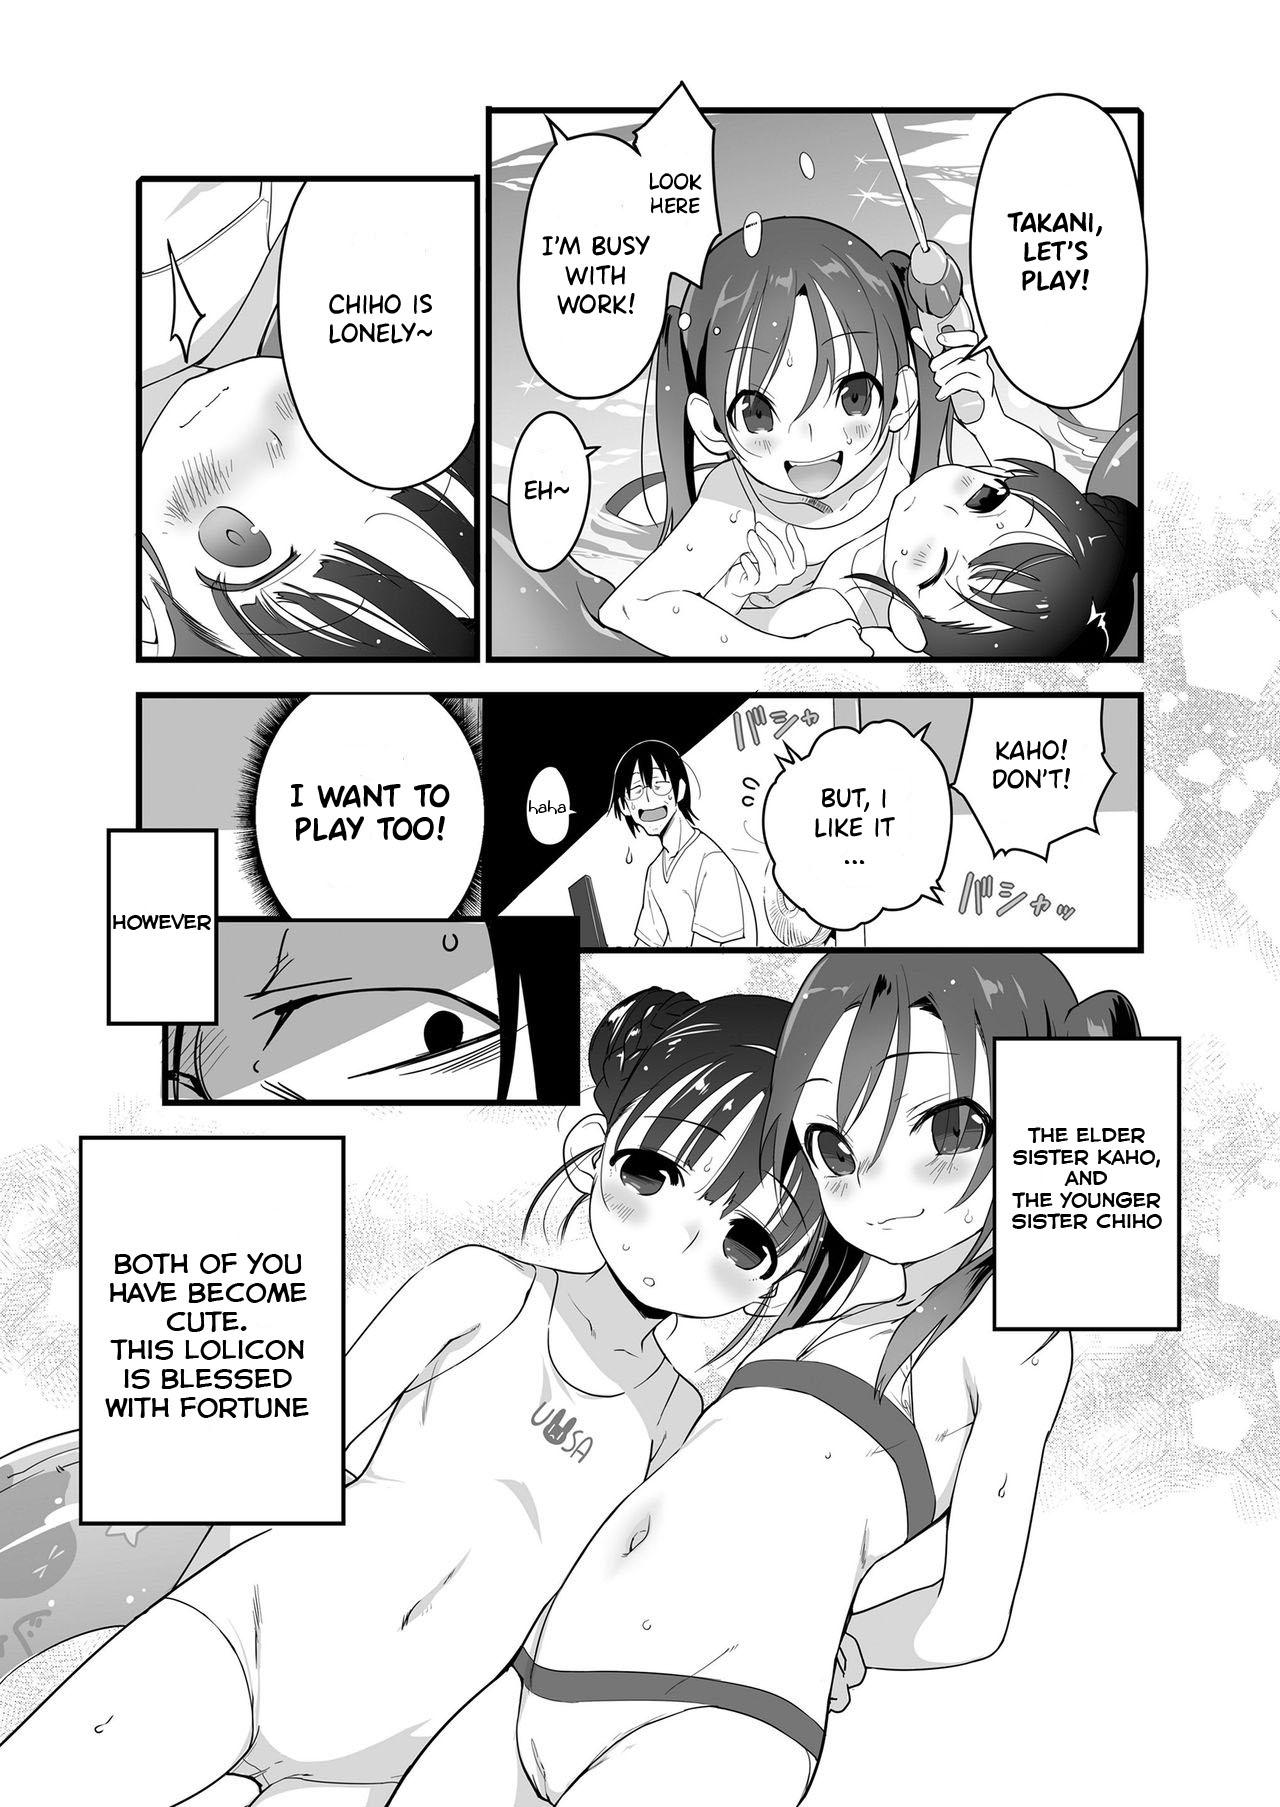 Webcamsex Uchiage Hanabi, Ane to Miruka? Imouto to Miruka? | Fireworks, Should we see it with the elder sister or the younger sister? Whooty - Page 3